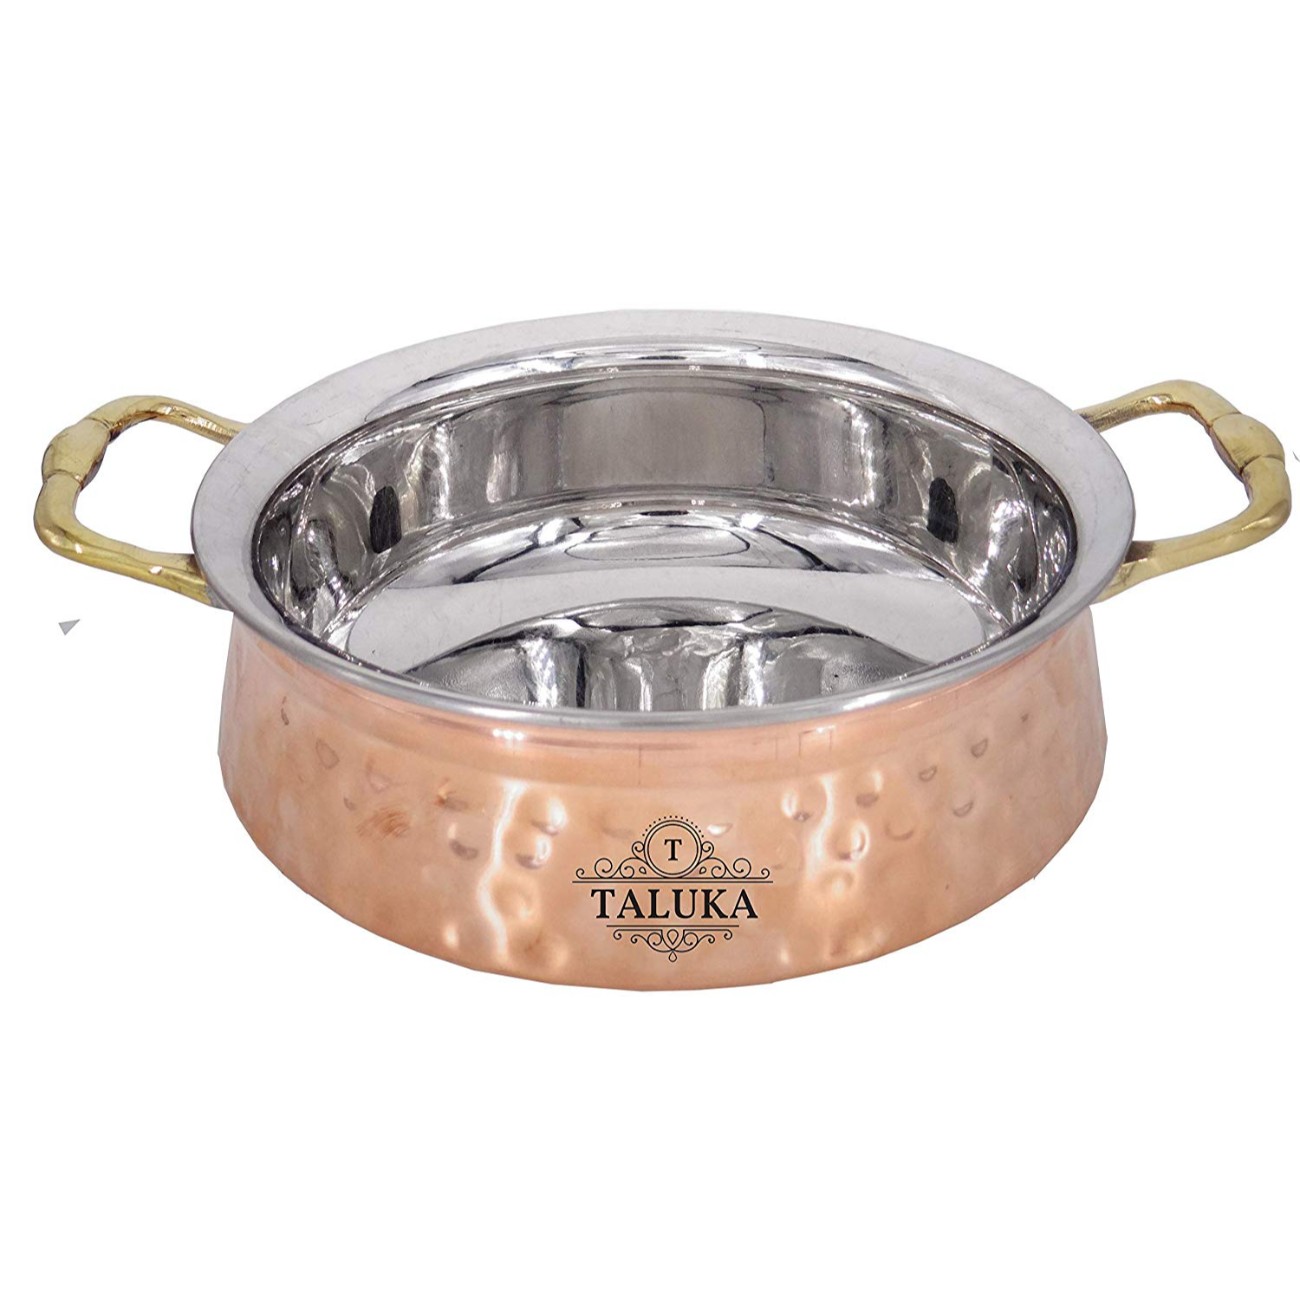 Handmade Copper Steel Hammered Serving Handi With Brass Handle Bowl For